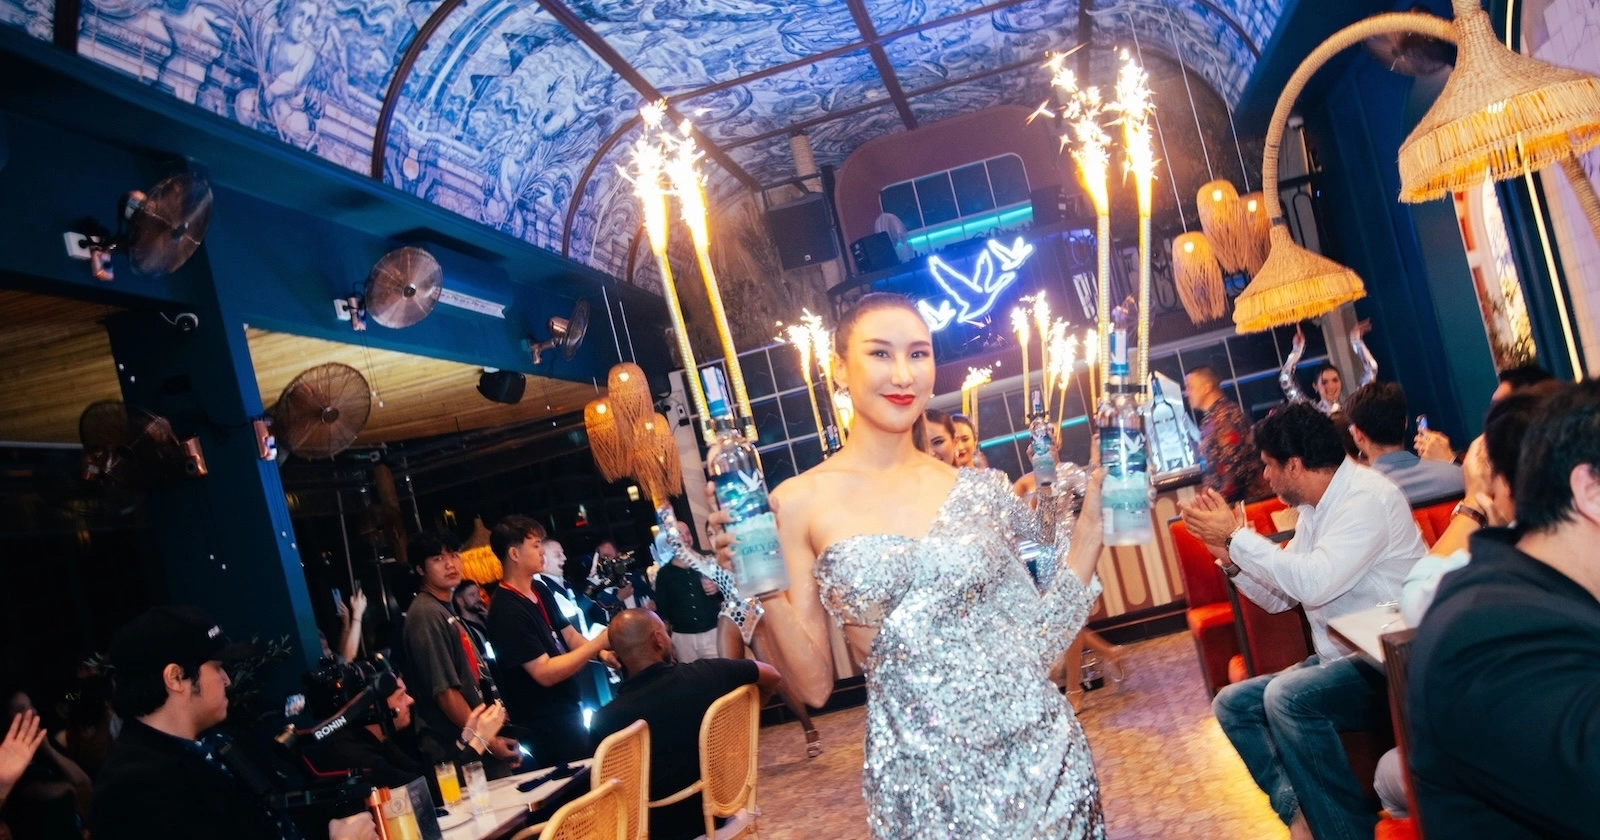 Thai model is holding bottles of Grey Goose with sparklers at Pastel rooftop bar in Sukhumvit Soi 11 in Bangkok Thailand during a corporate event and product launch for new Grey Goose bottles